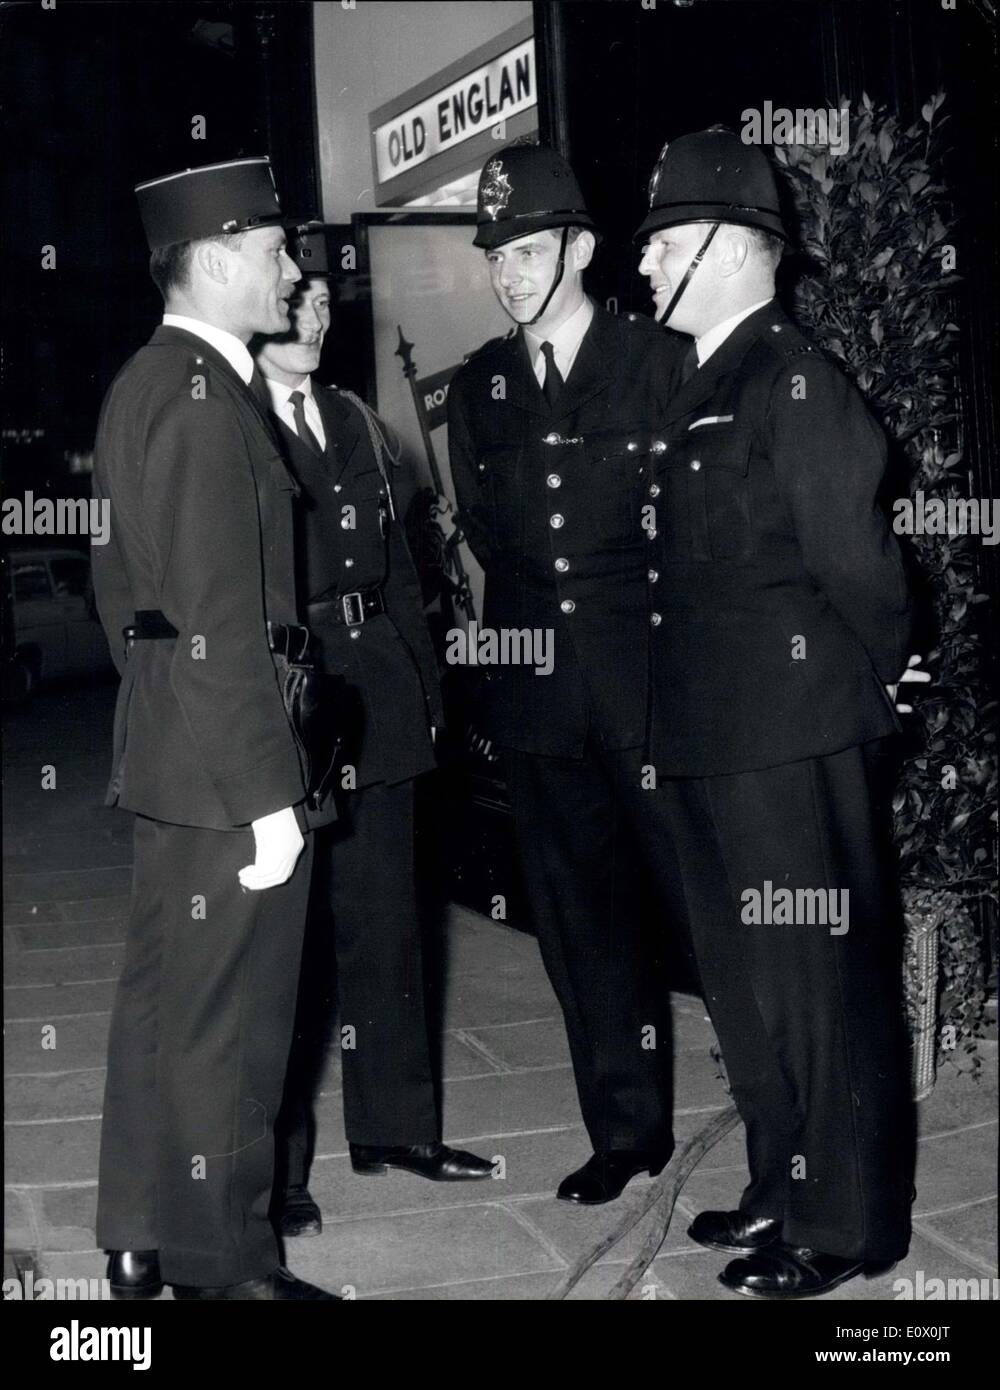 Sep. 24, 1964 - French And English Policemen Meet At ''Old England'': A cocktail party organised by the British Men's wear guild was held at ''Old England'', The famous shop near the opera, last night. Photo Shows: Two bobbies from surrey have a friendly chat with two pairs policemen in front of ''Old England'' last night. Stock Photo